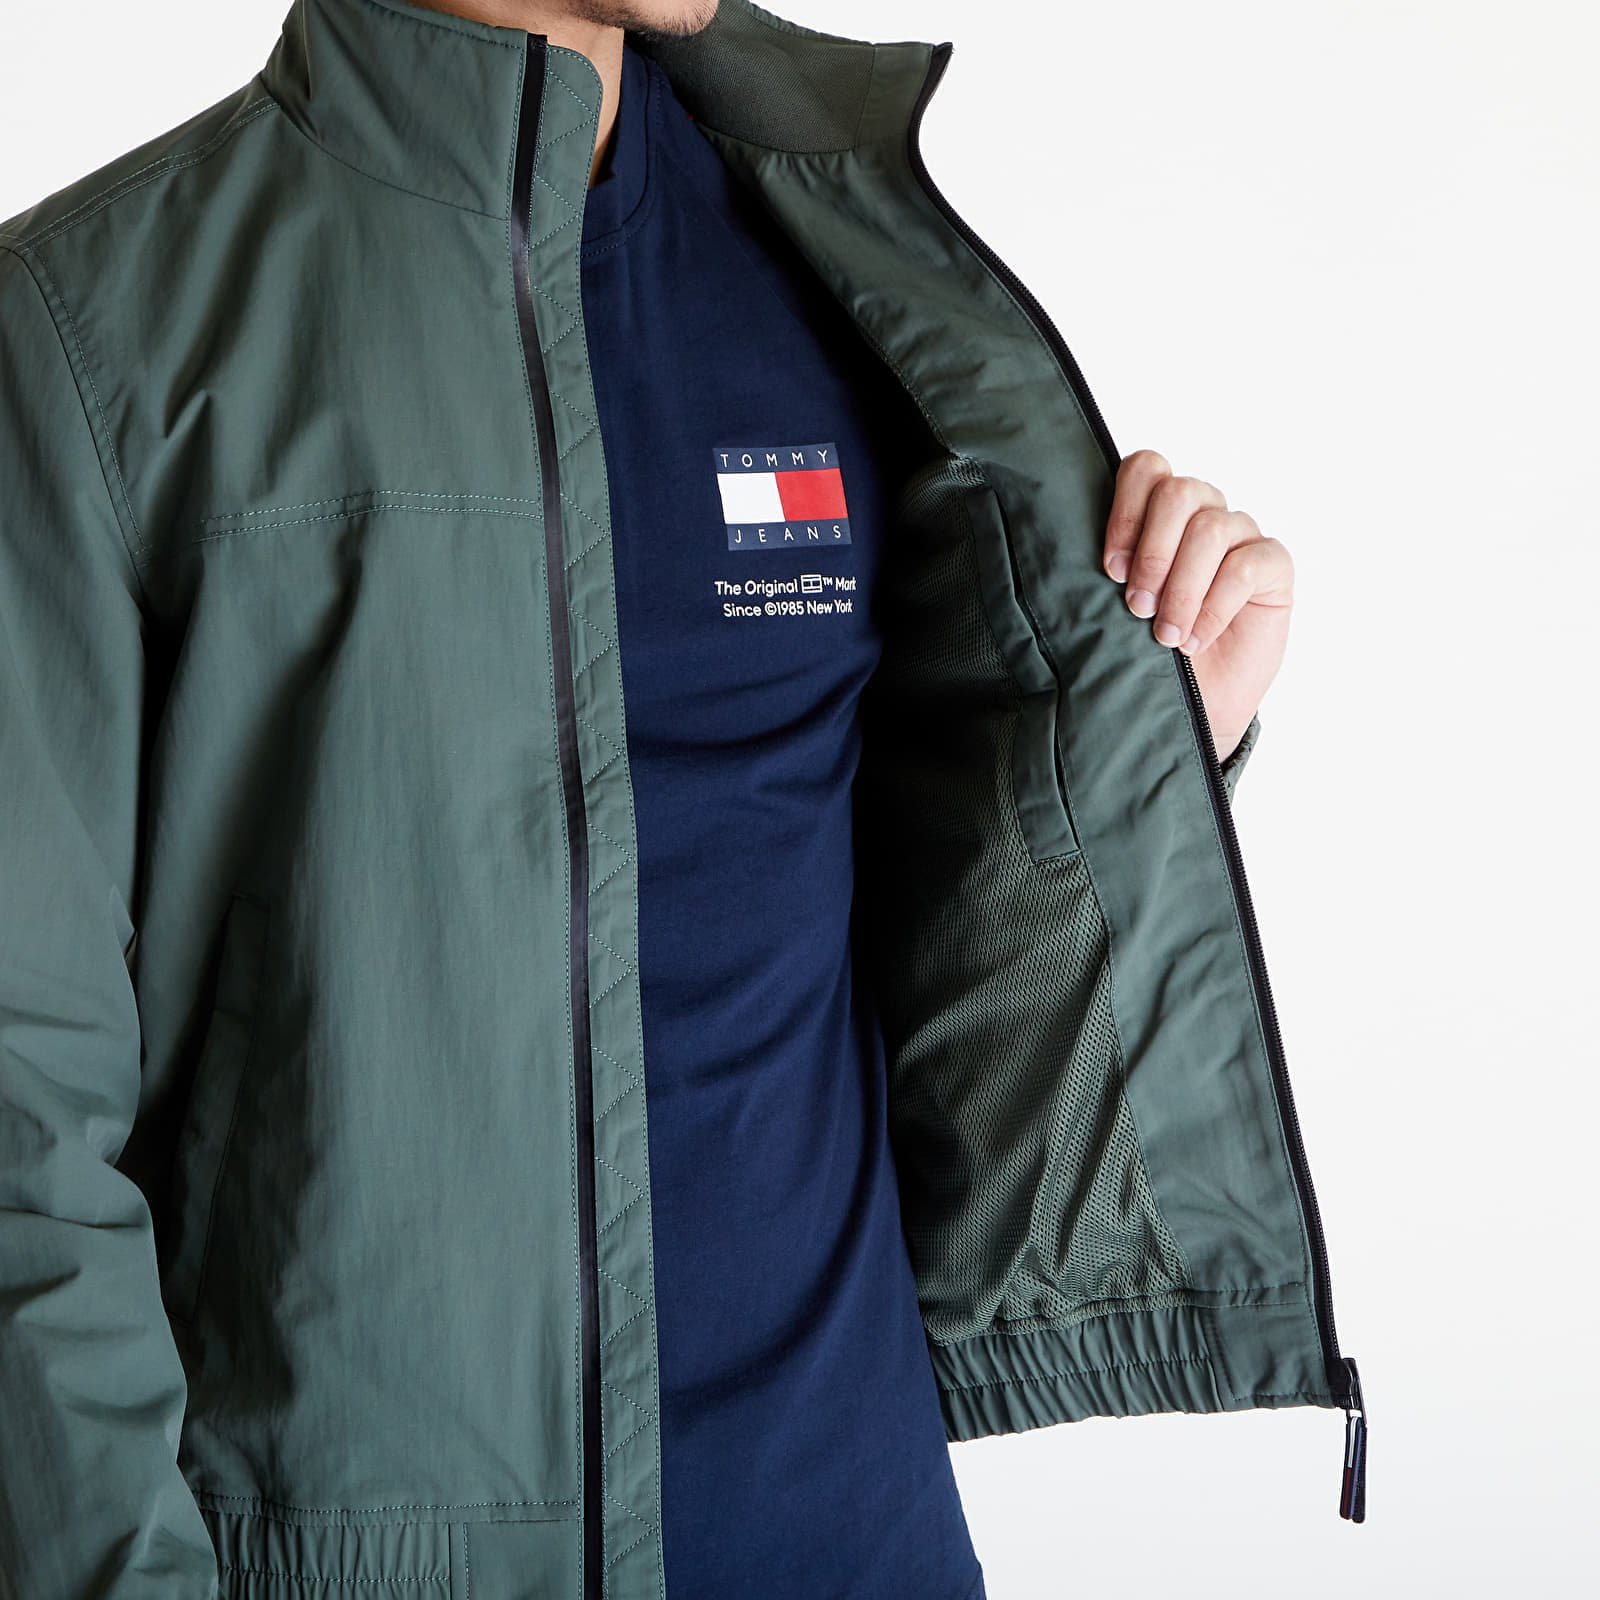 Tommy Jeans Essential Casual Bomber